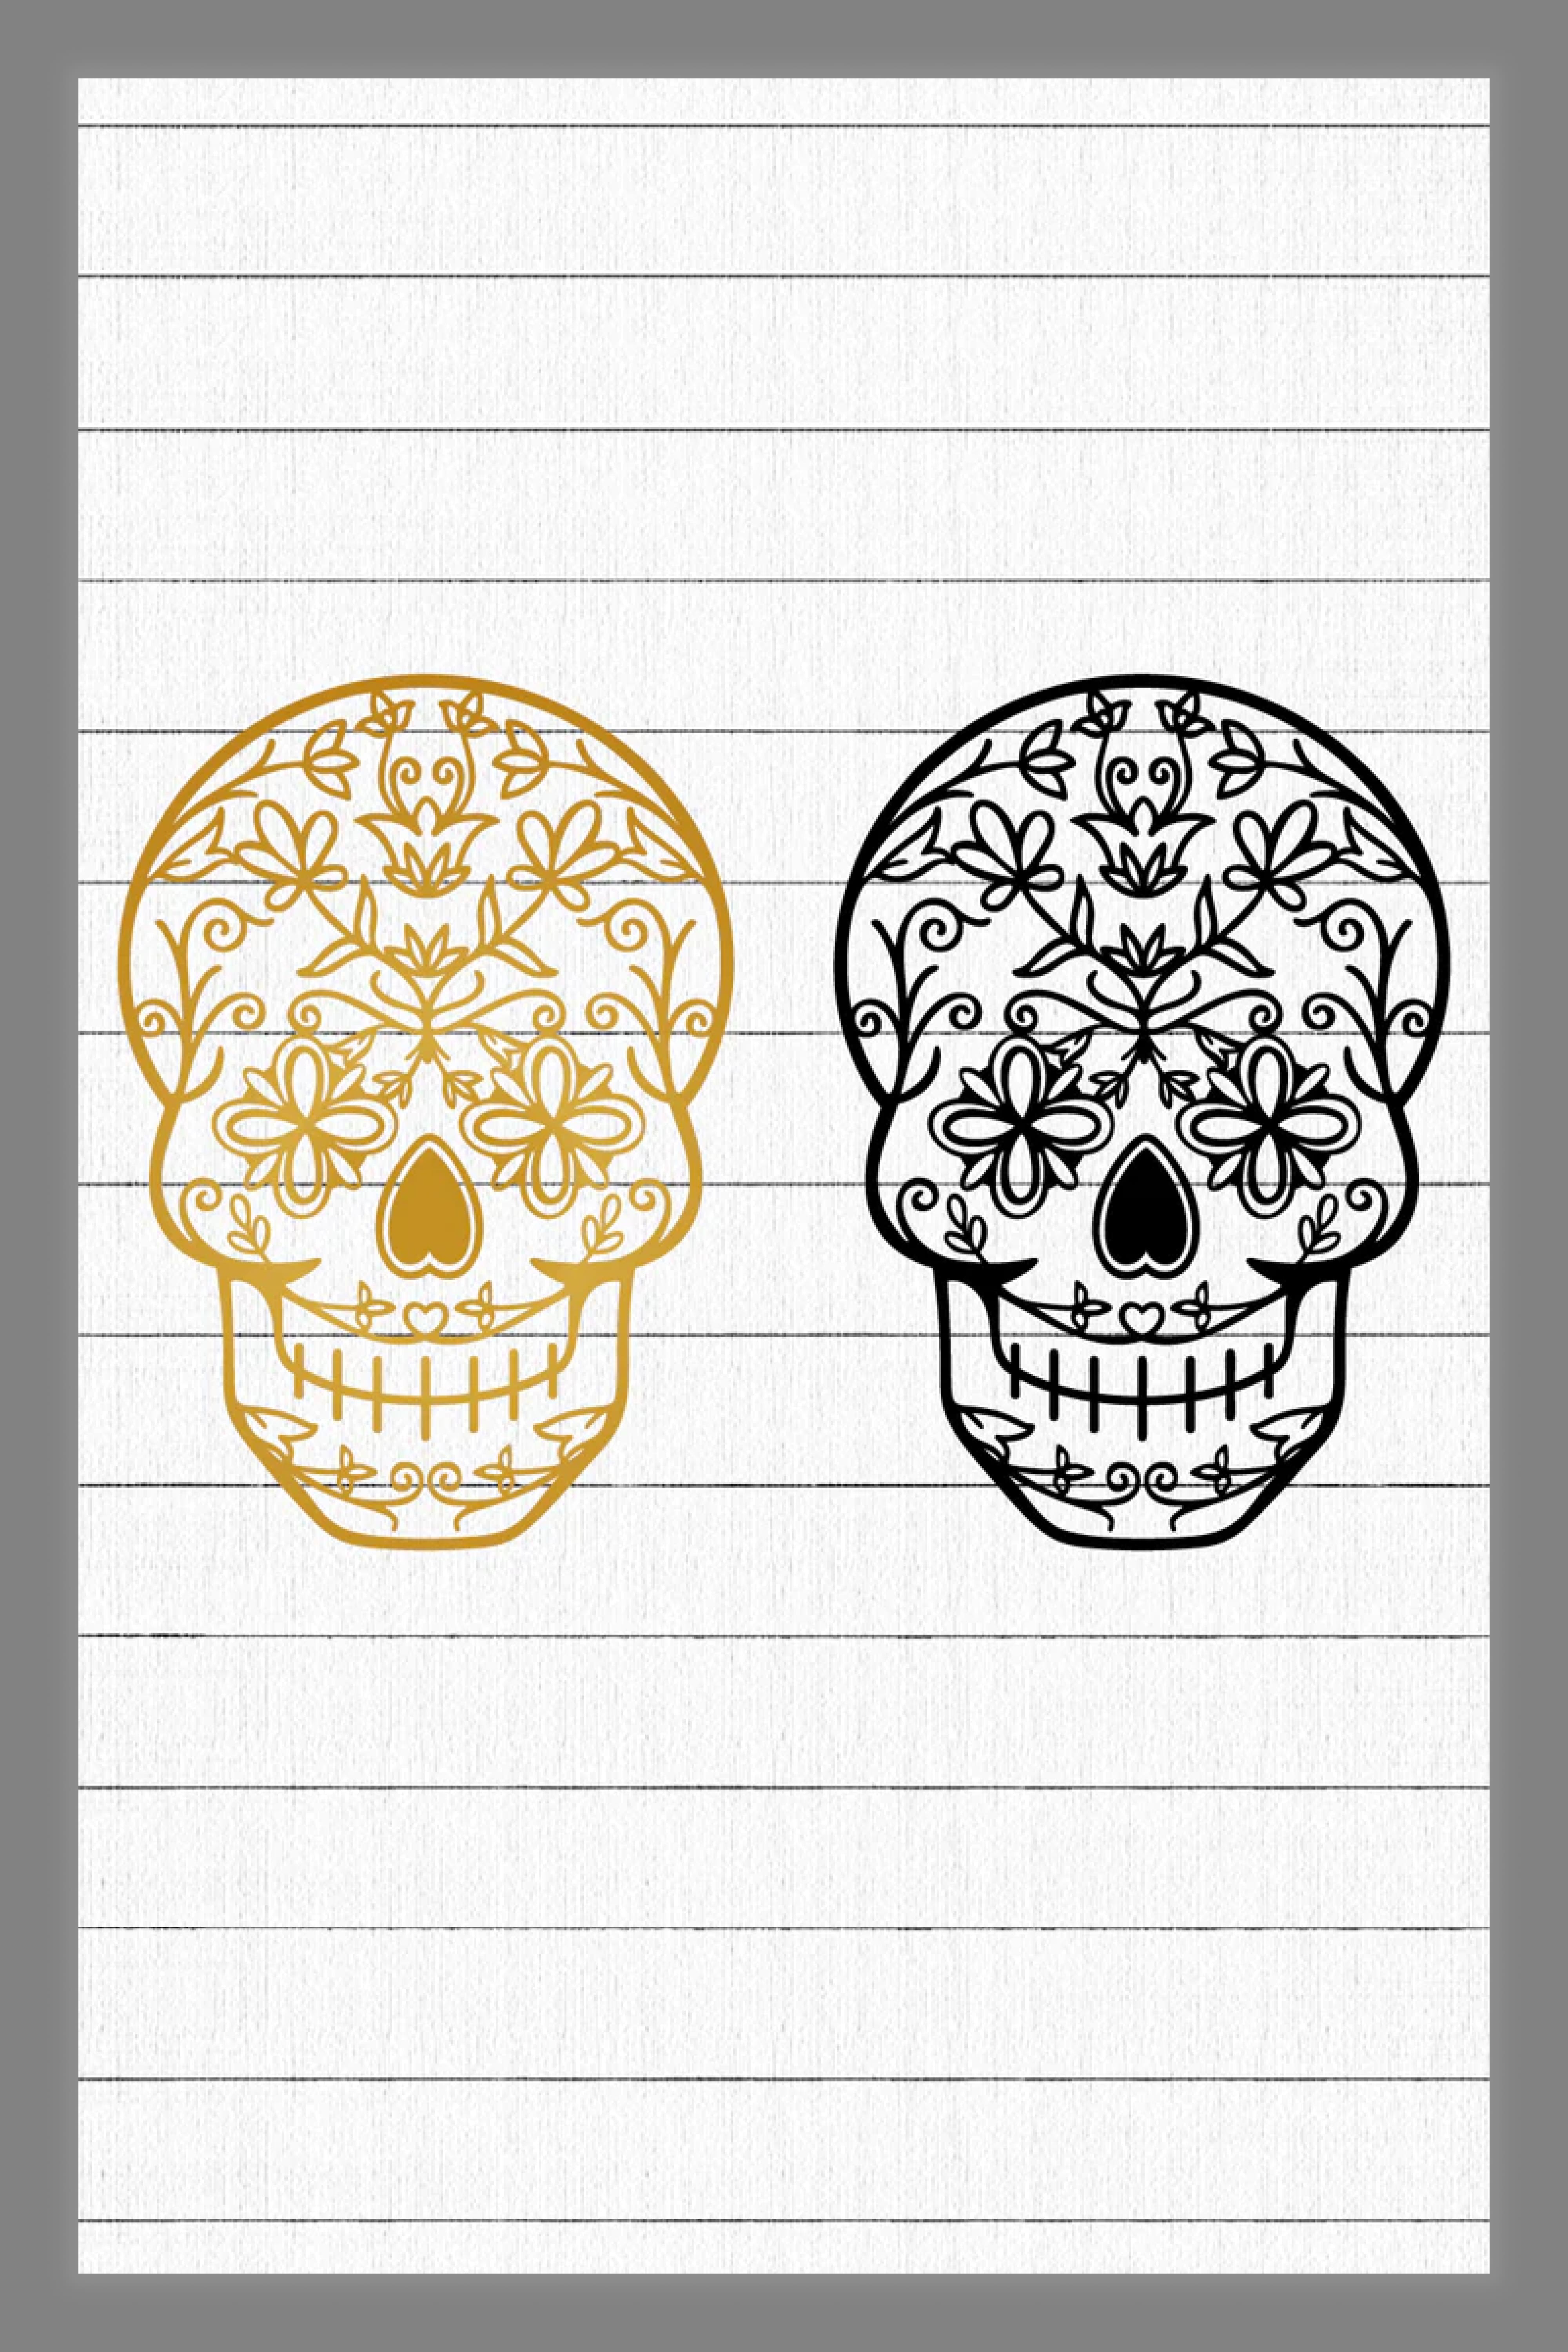 Two skulls in yellow and black with patterns on them.